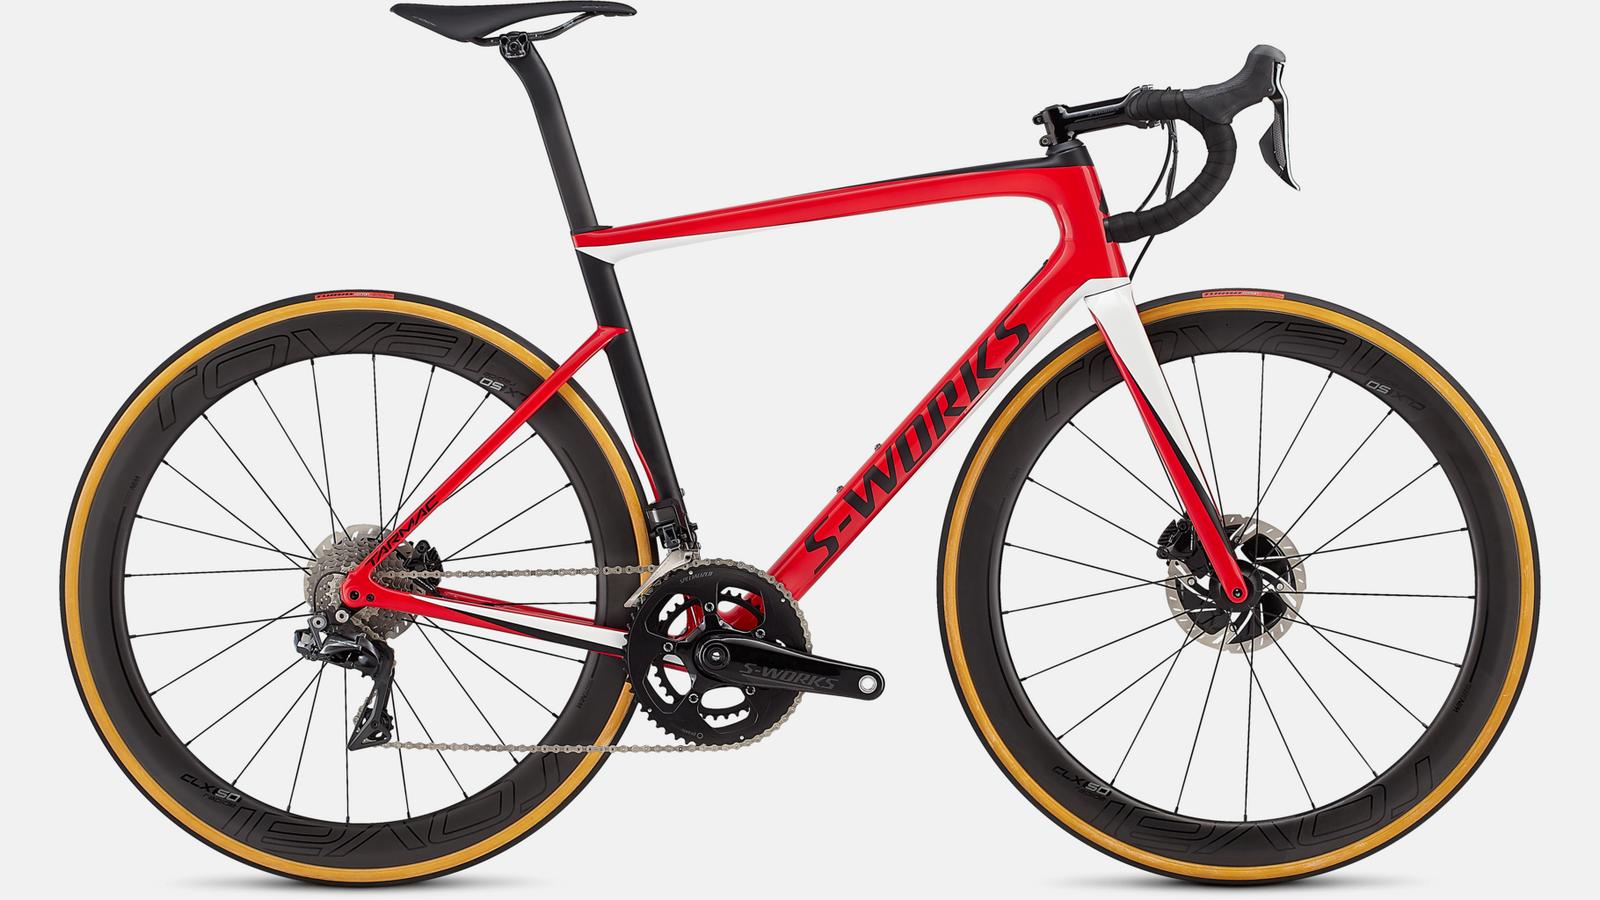 Paint for 2019 Specialized Men's S-Works Tarmac Disc - Gloss Flo Red